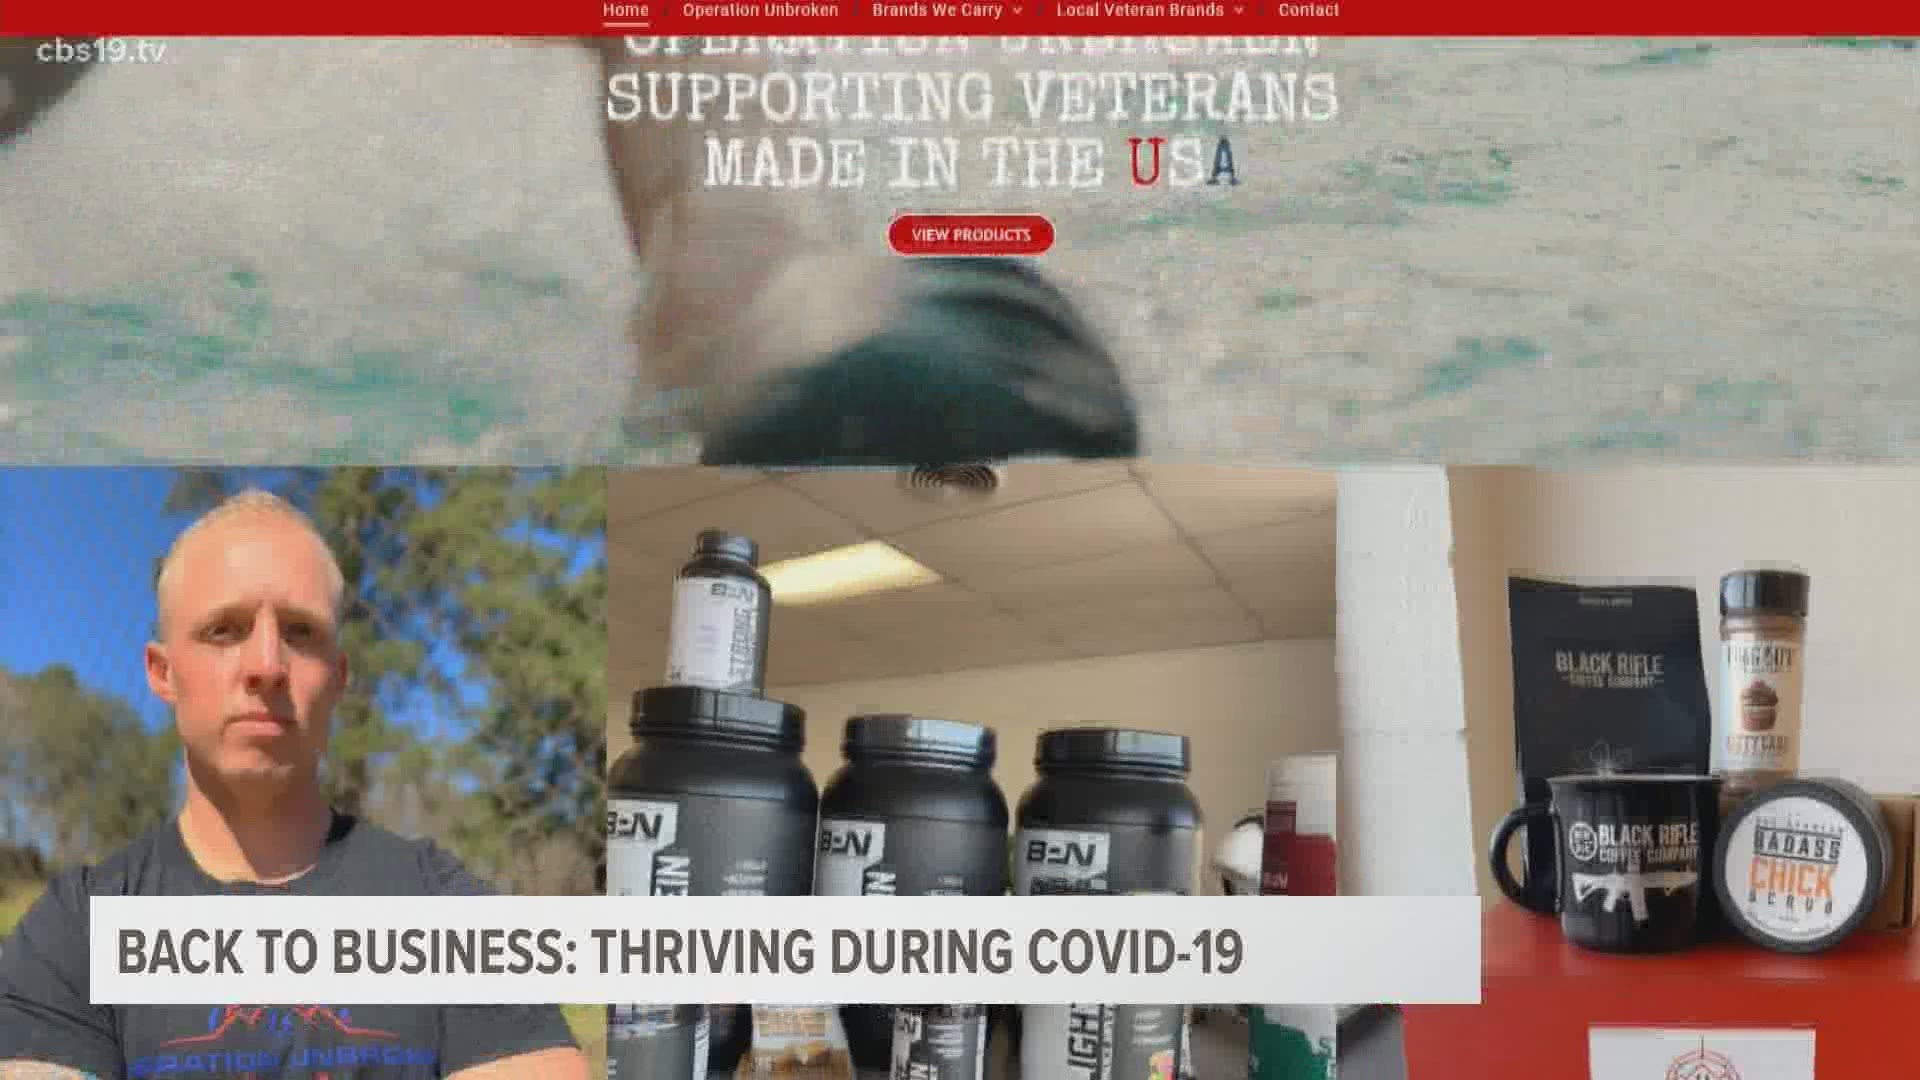 Despite a global pandemic, one East Texas business has found ways to support veterans across the region.